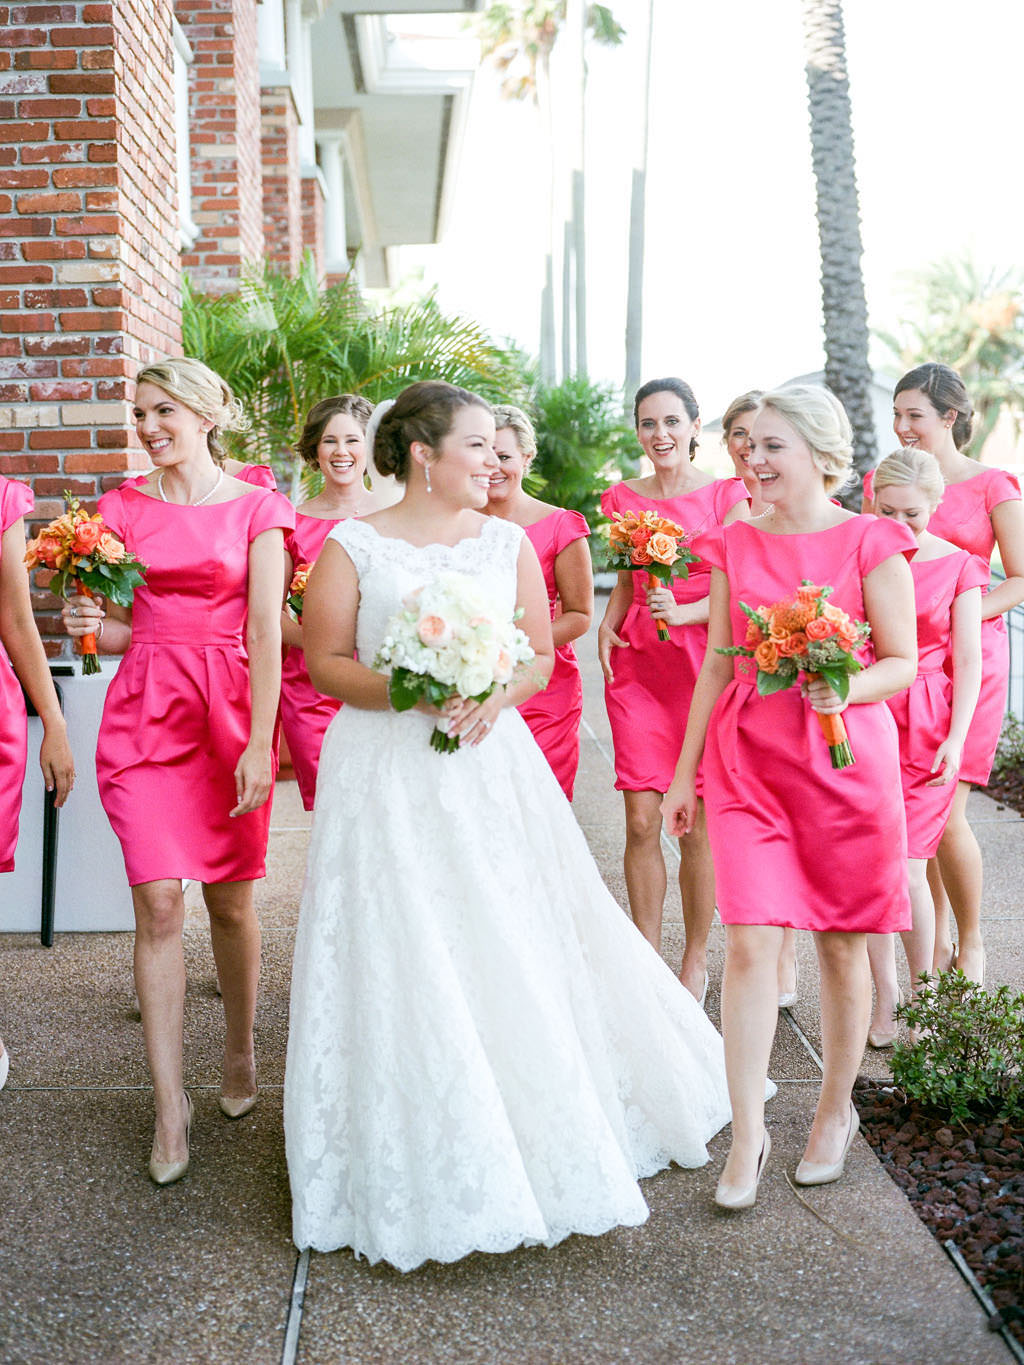 Kate Spade Inspired Wedding, Bride and Bridesmaids Wedding Portrait, Bridesmaids in Matching Short Bright Pink Dresses with Colorful Floral Bouquets, Bride in Lace A Line Off the Shoulder Neckline with White and Blush Pink Floral Bouquet